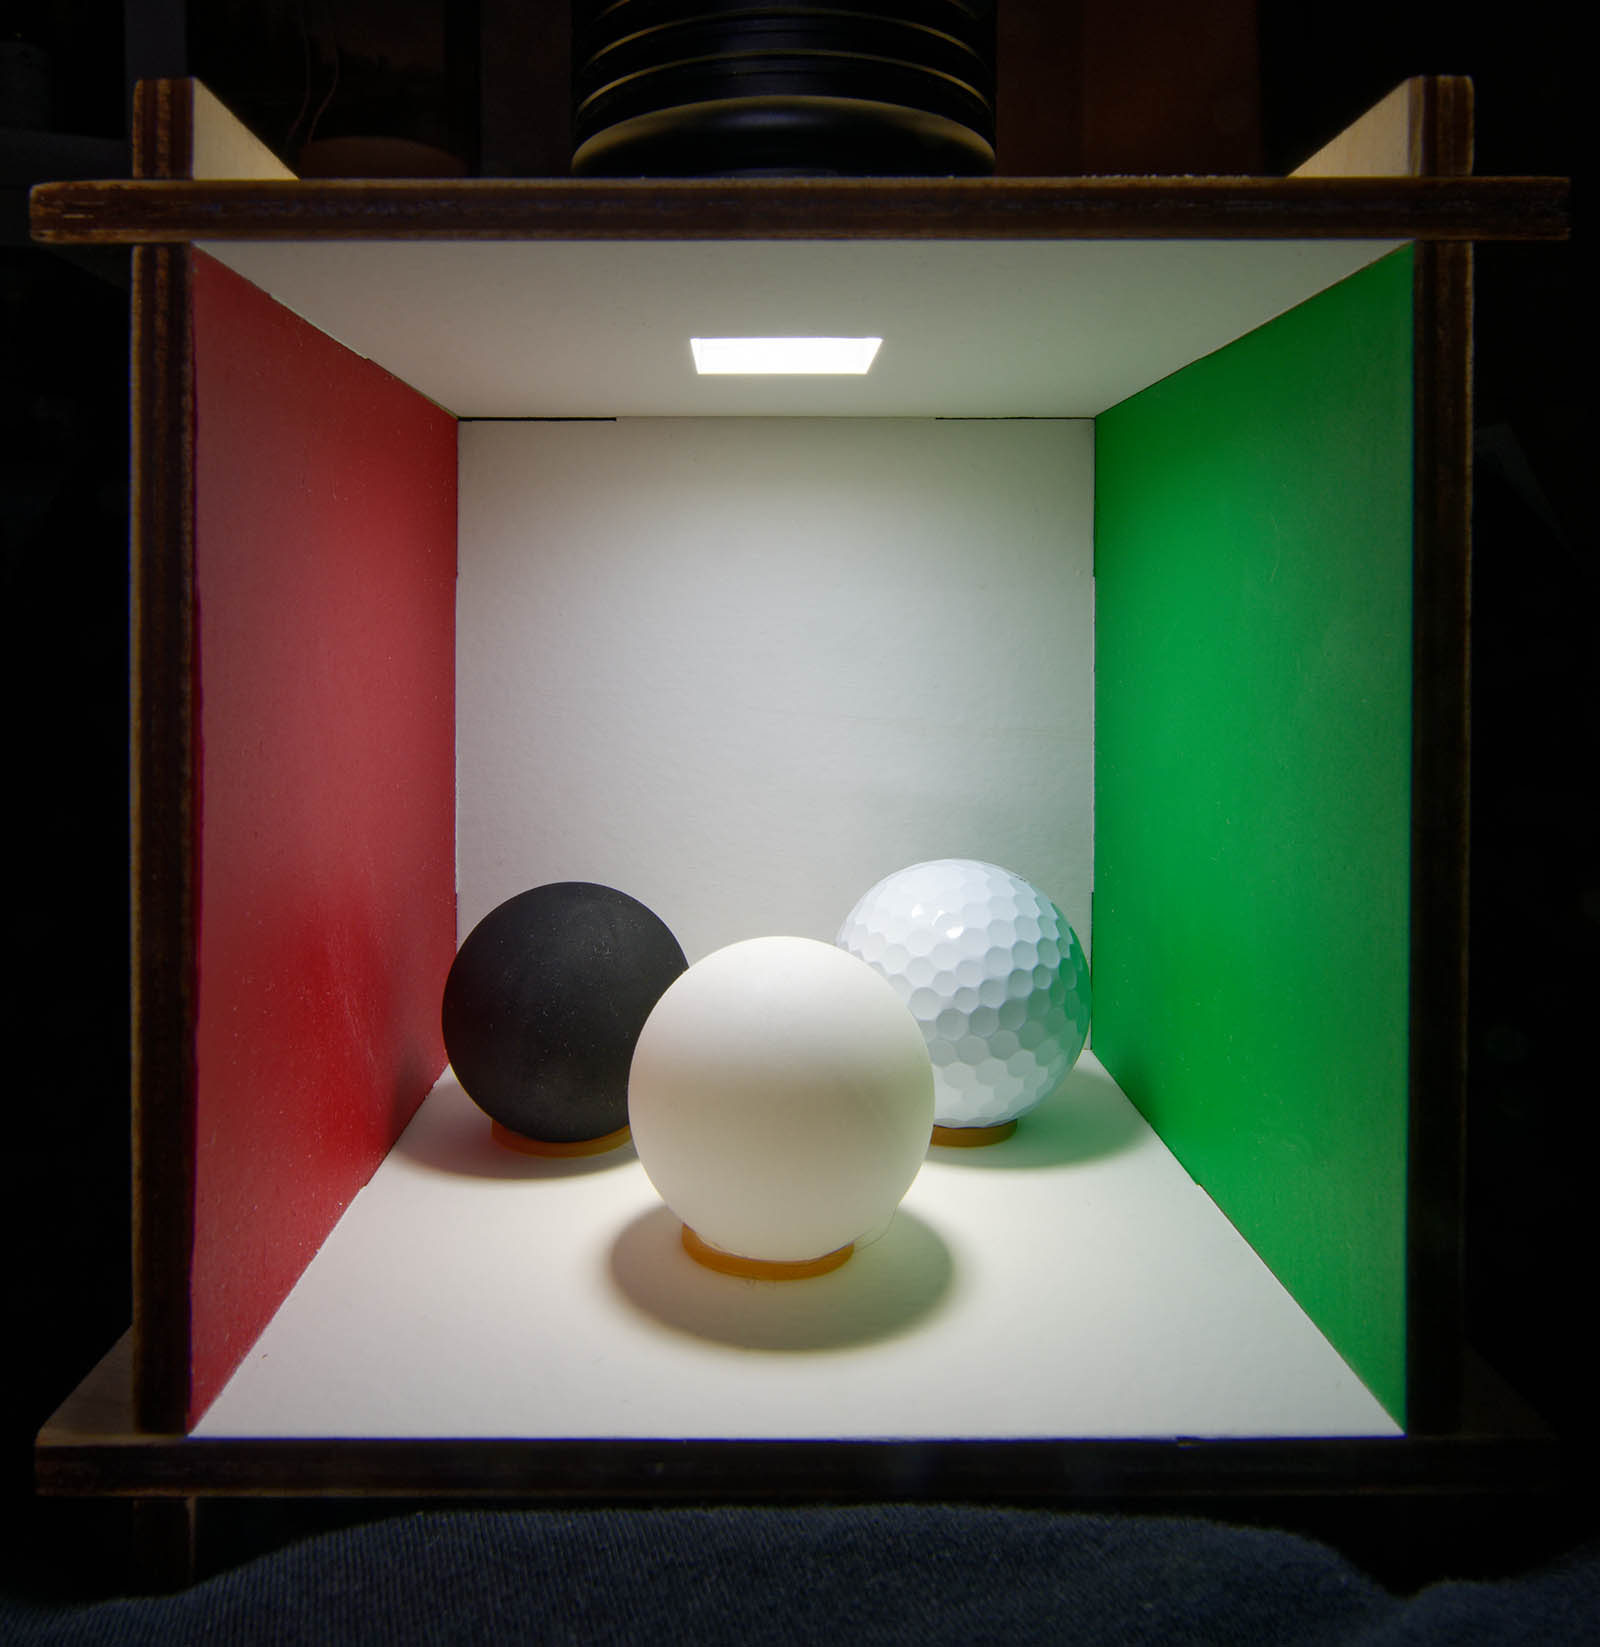 Cornell Box with sporting balls